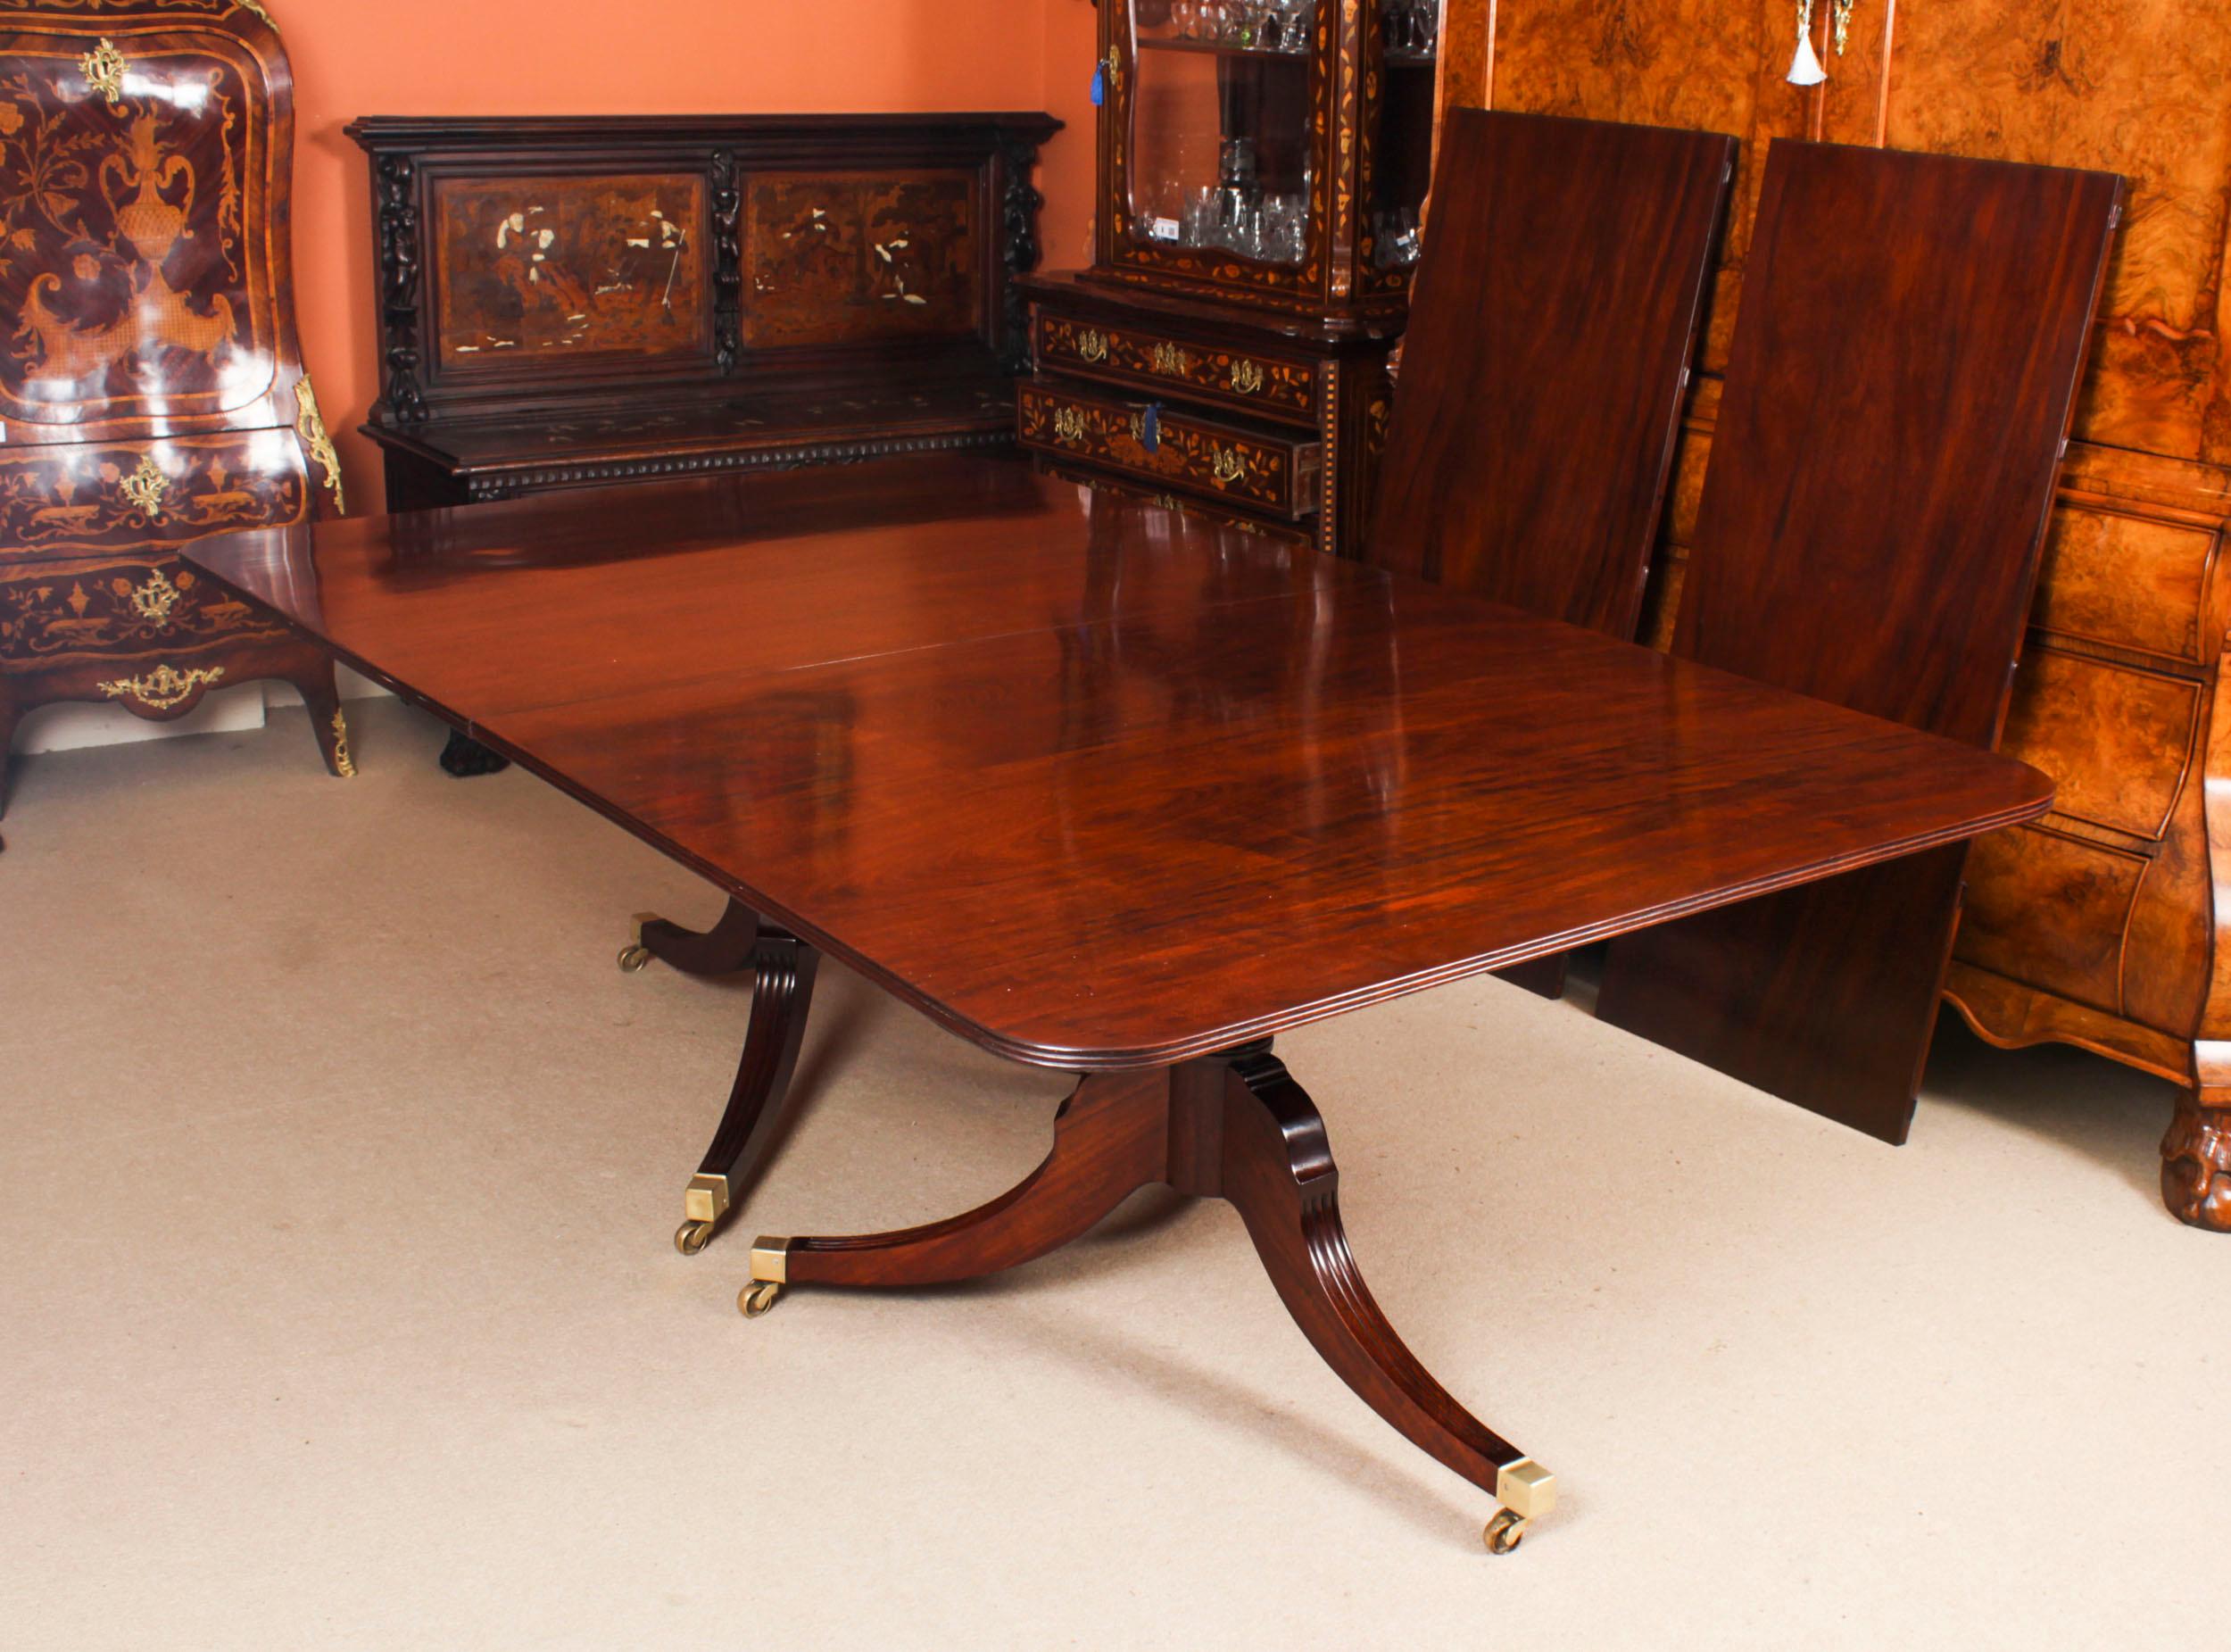 Antique 14ft Regency Revival Triple Pillar Dining Table & 14 Chairs 19th Century For Sale 3